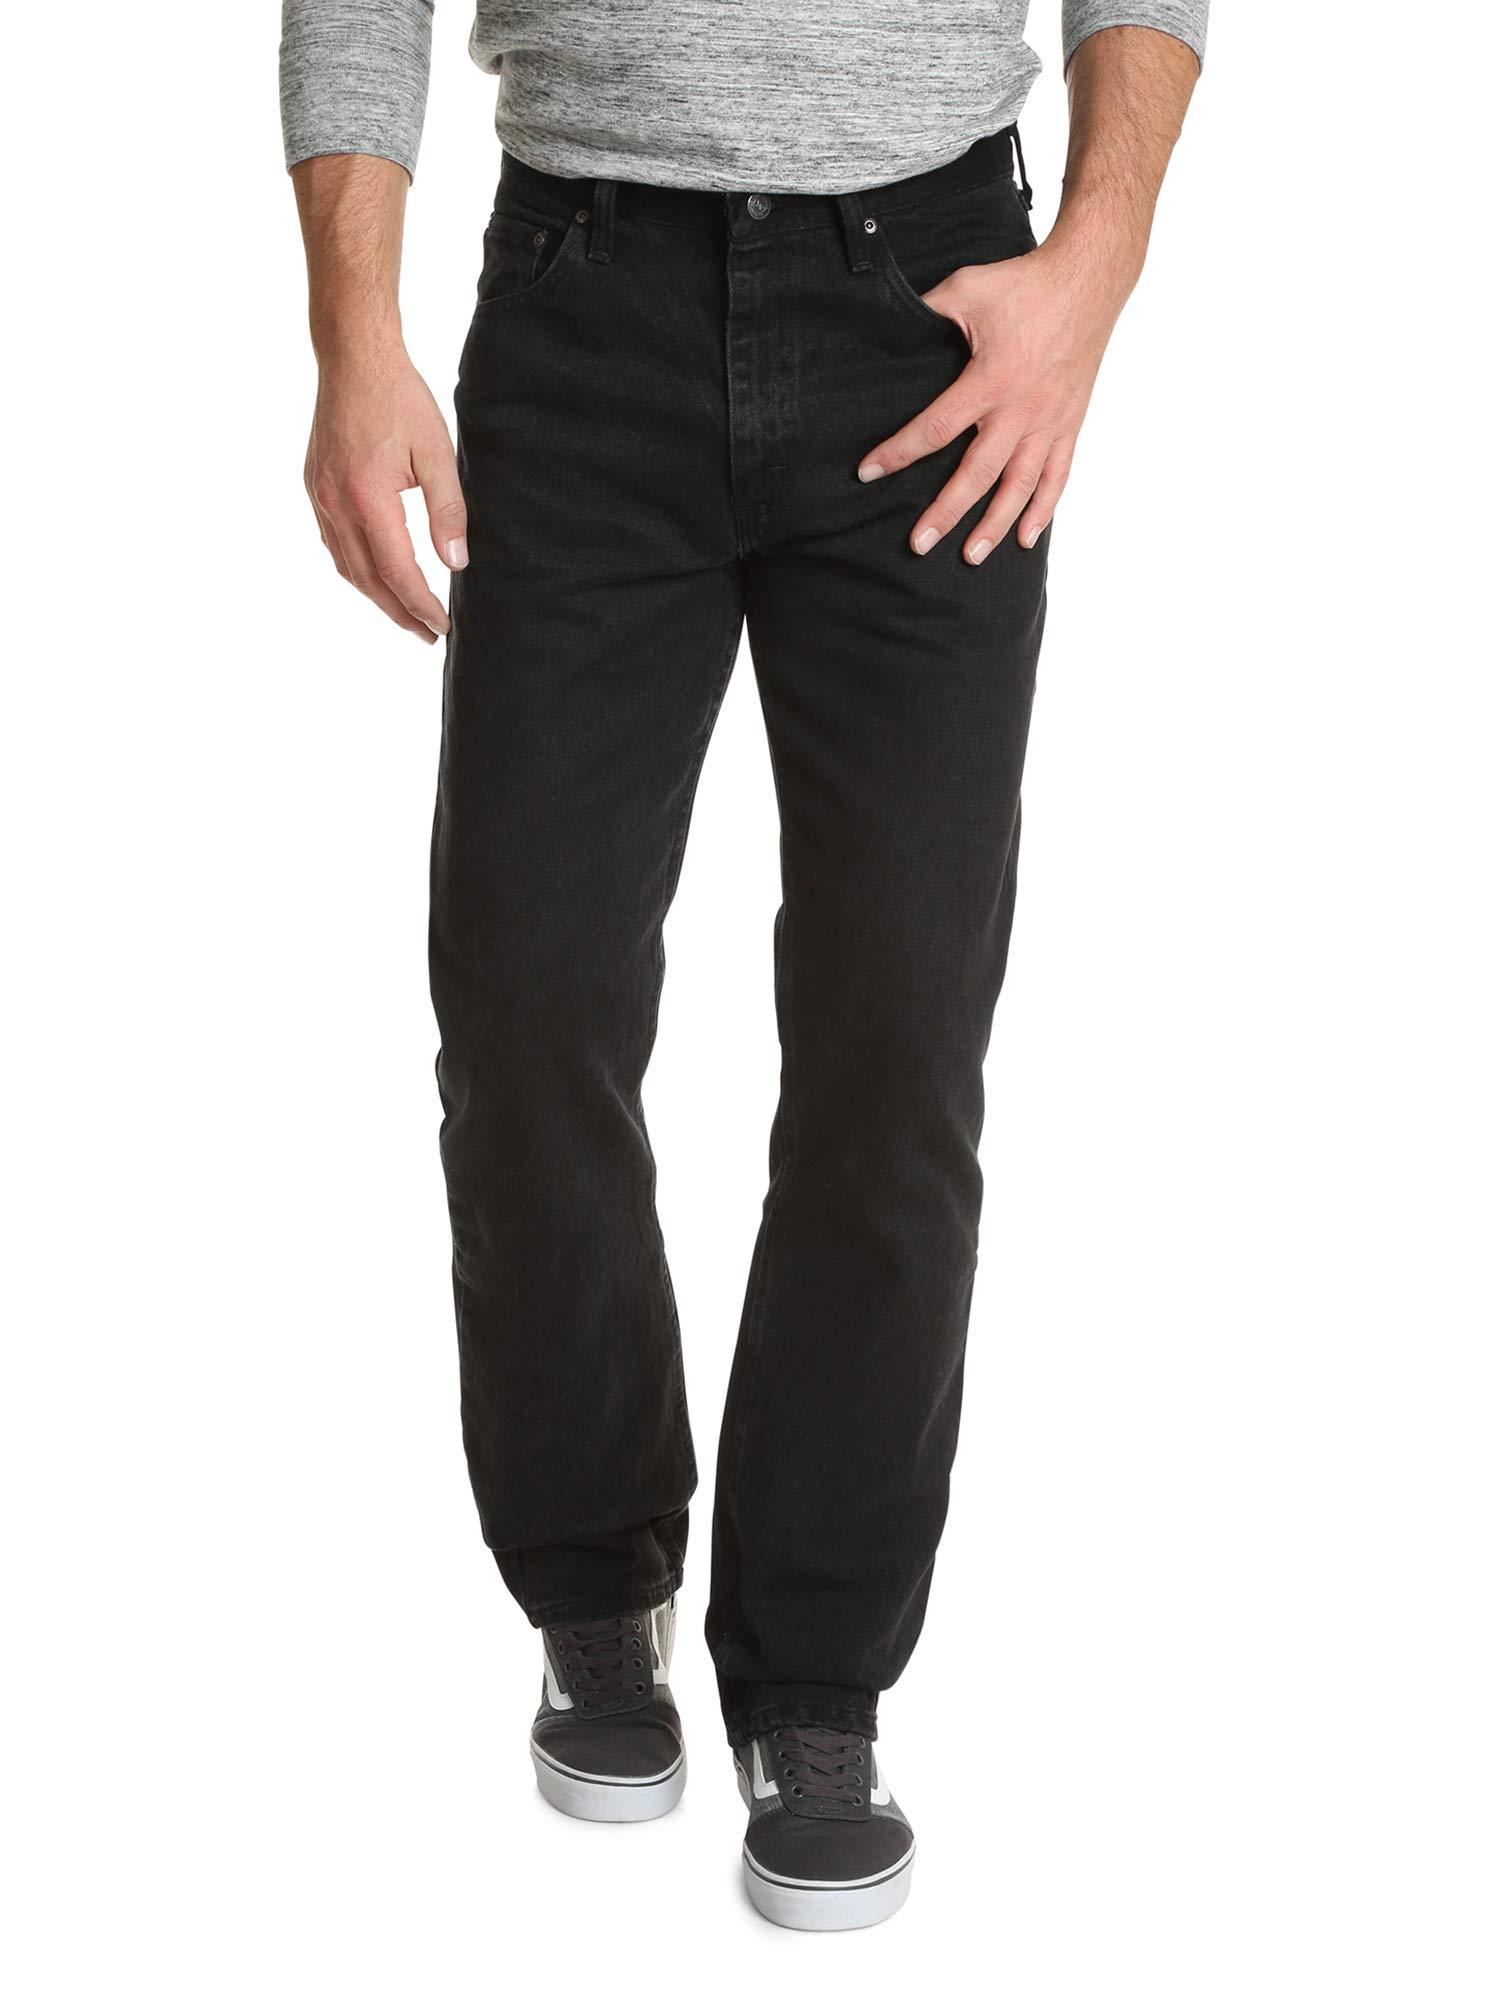 Wrangler Cotton Authentics Classic Relaxed Fit Jean in Black for Men - Lyst